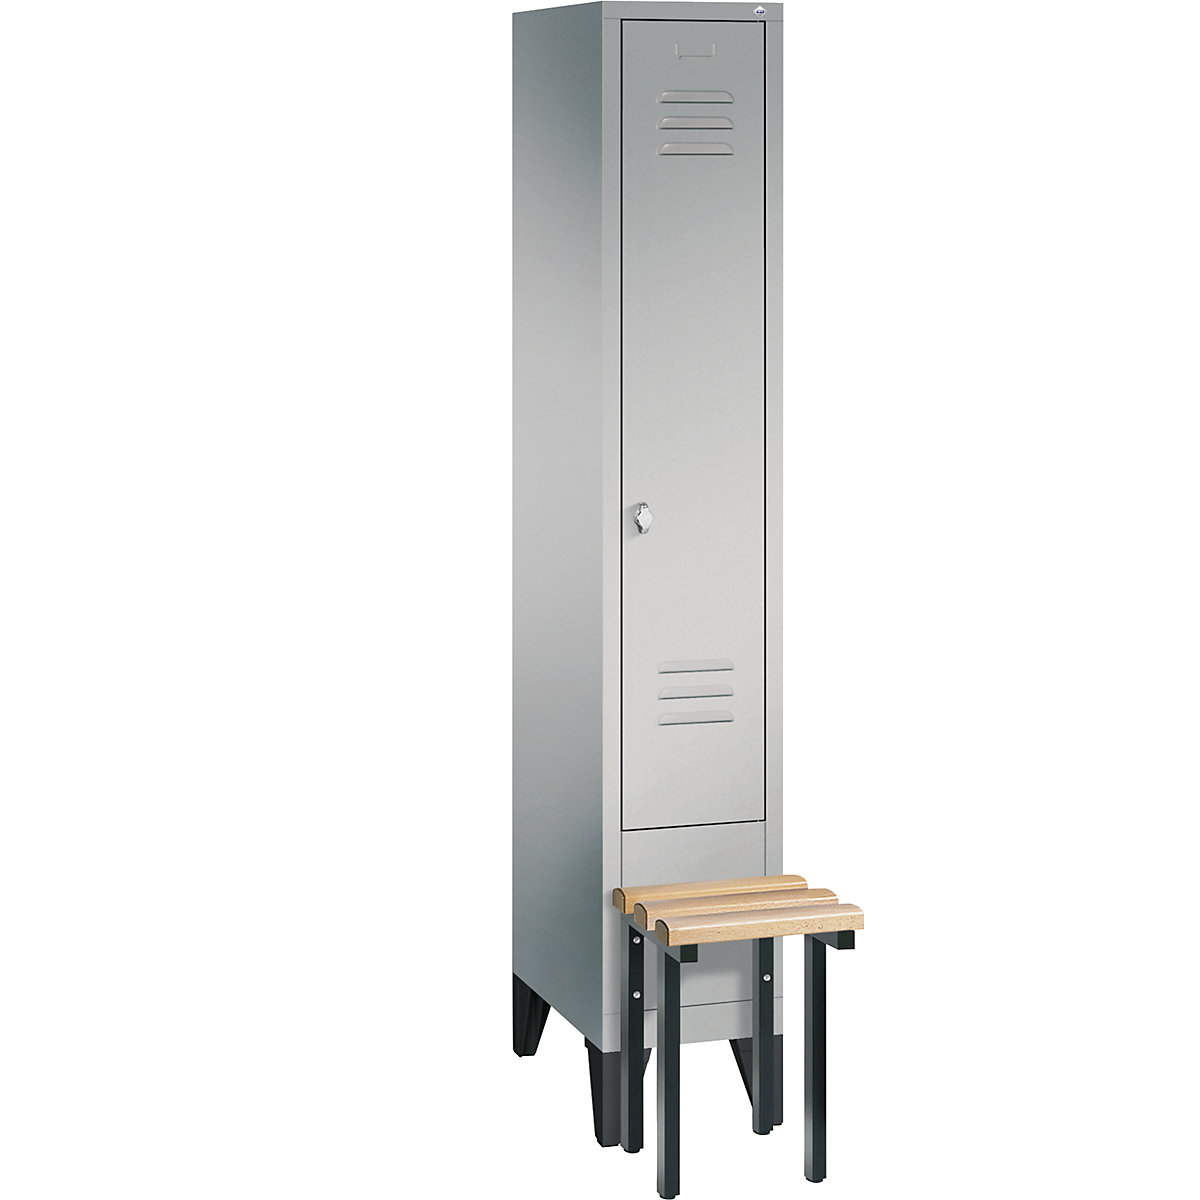 CLASSIC cloakroom locker with bench mounted in front – C+P, 1 compartment, compartment width 300 mm, white aluminium-8